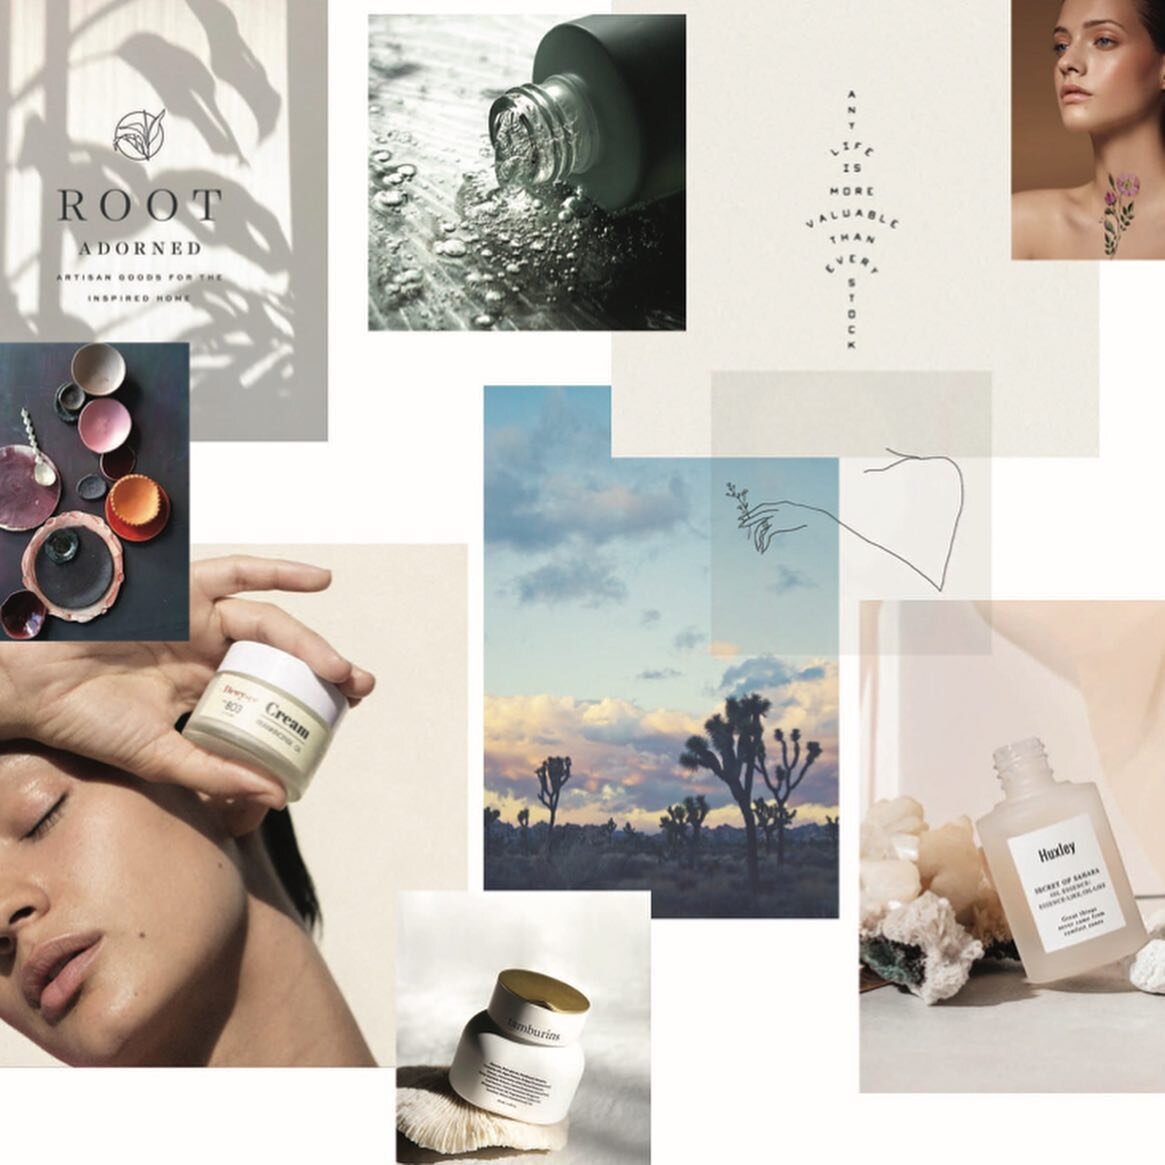 Fresh client mood boards heading out today! 🙌🏼 (yes, I&rsquo;m obsessed with that Root Adorned image and I&rsquo;m sure I&rsquo;ll use it again) #atmospheric #elegance #evocative #comfort #luminescent #harmony Now we&rsquo;re having fun! #cnburginc